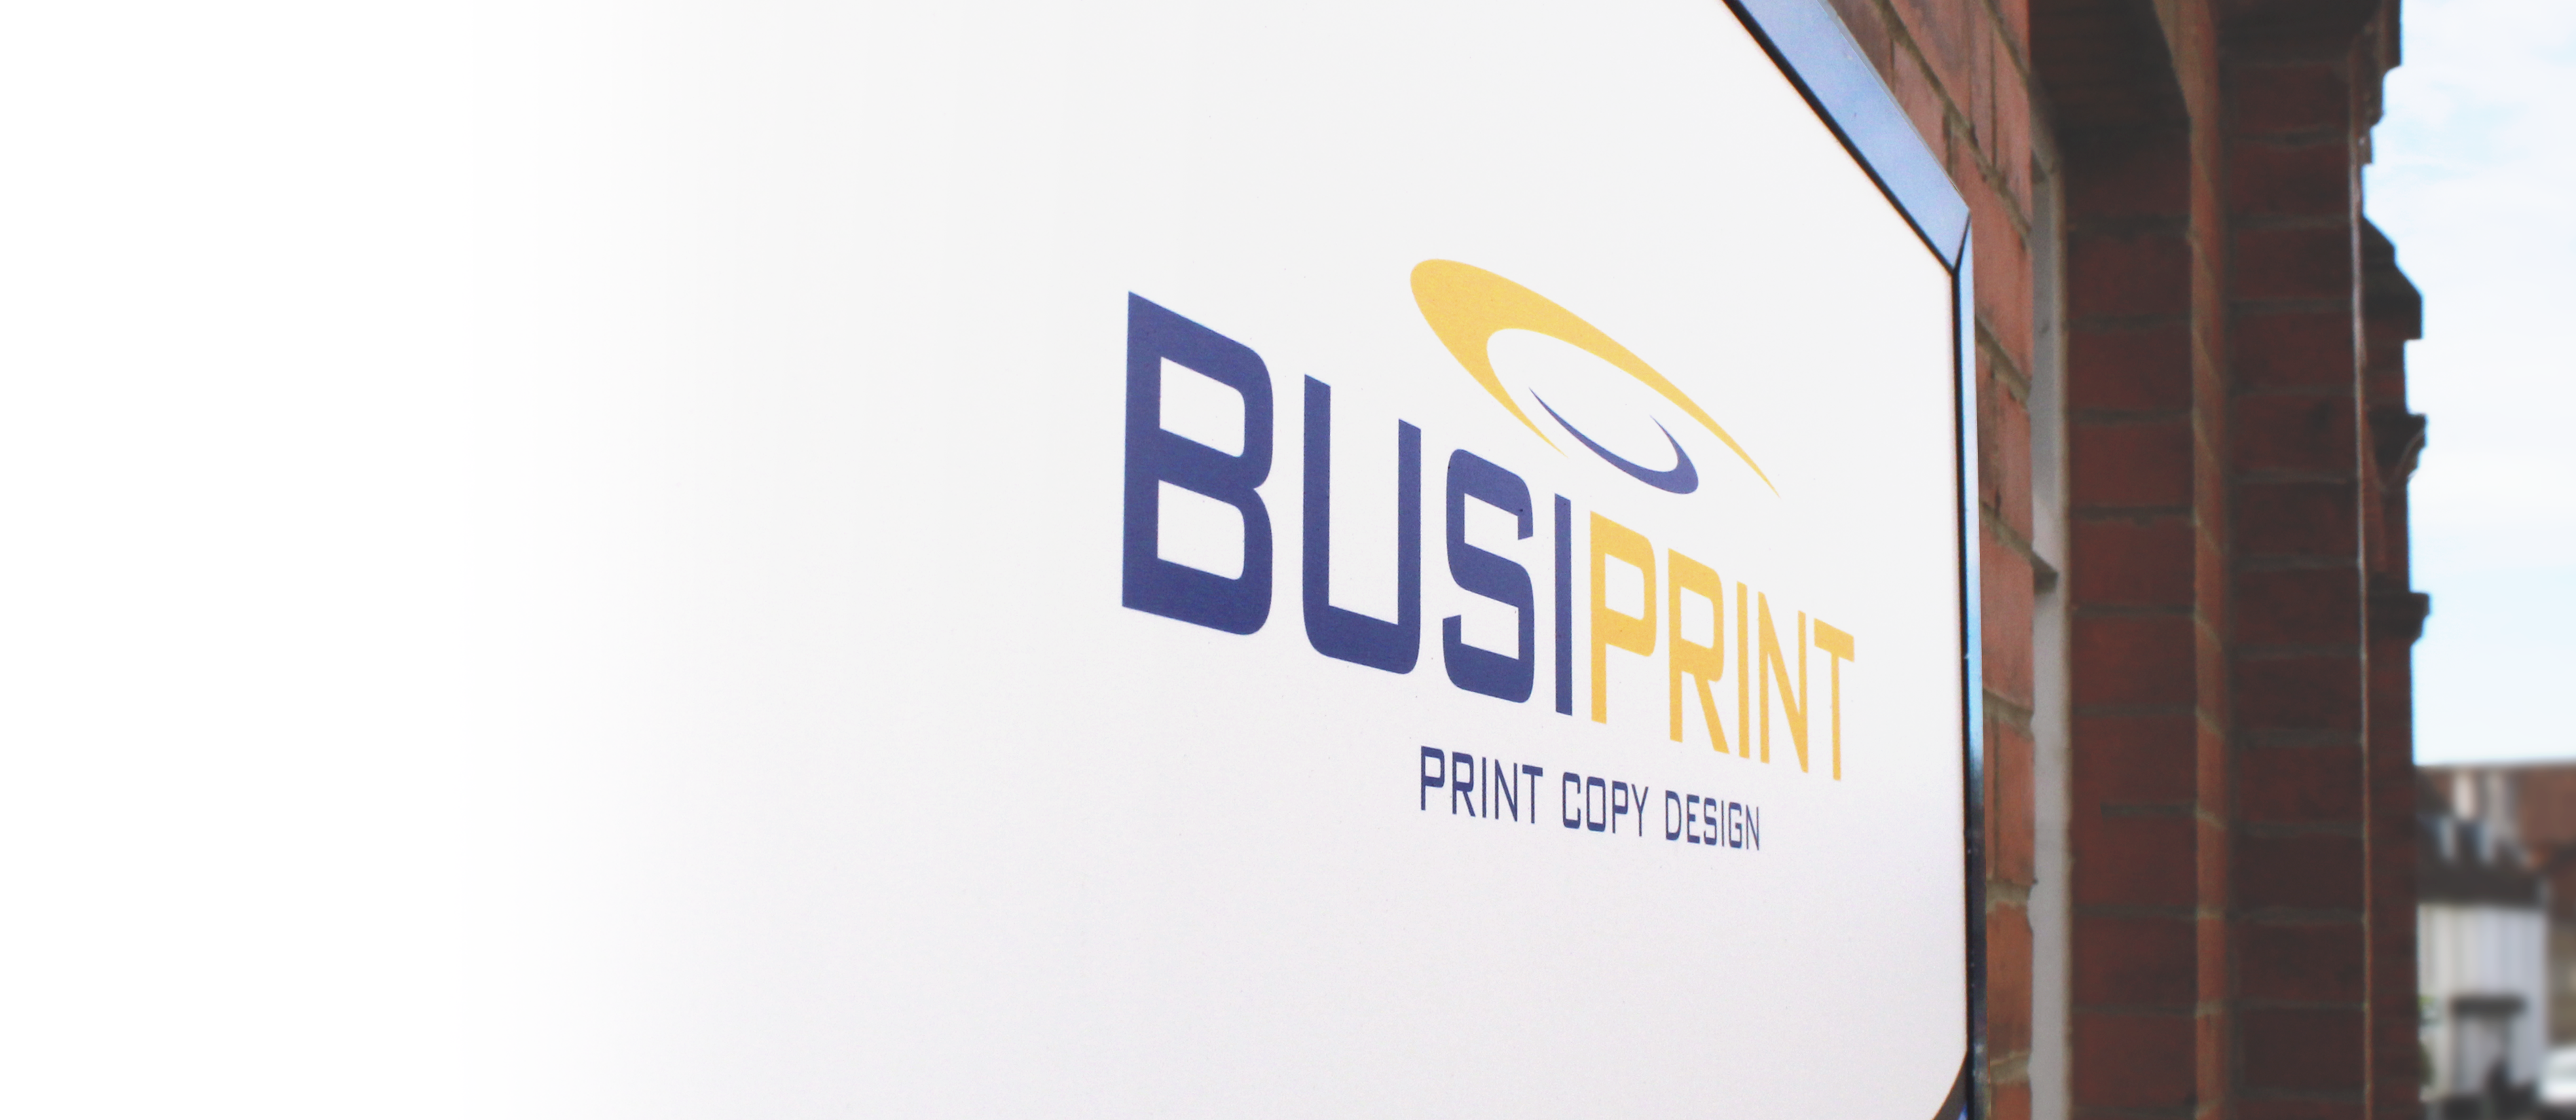 Busiprint sign and logo on sign